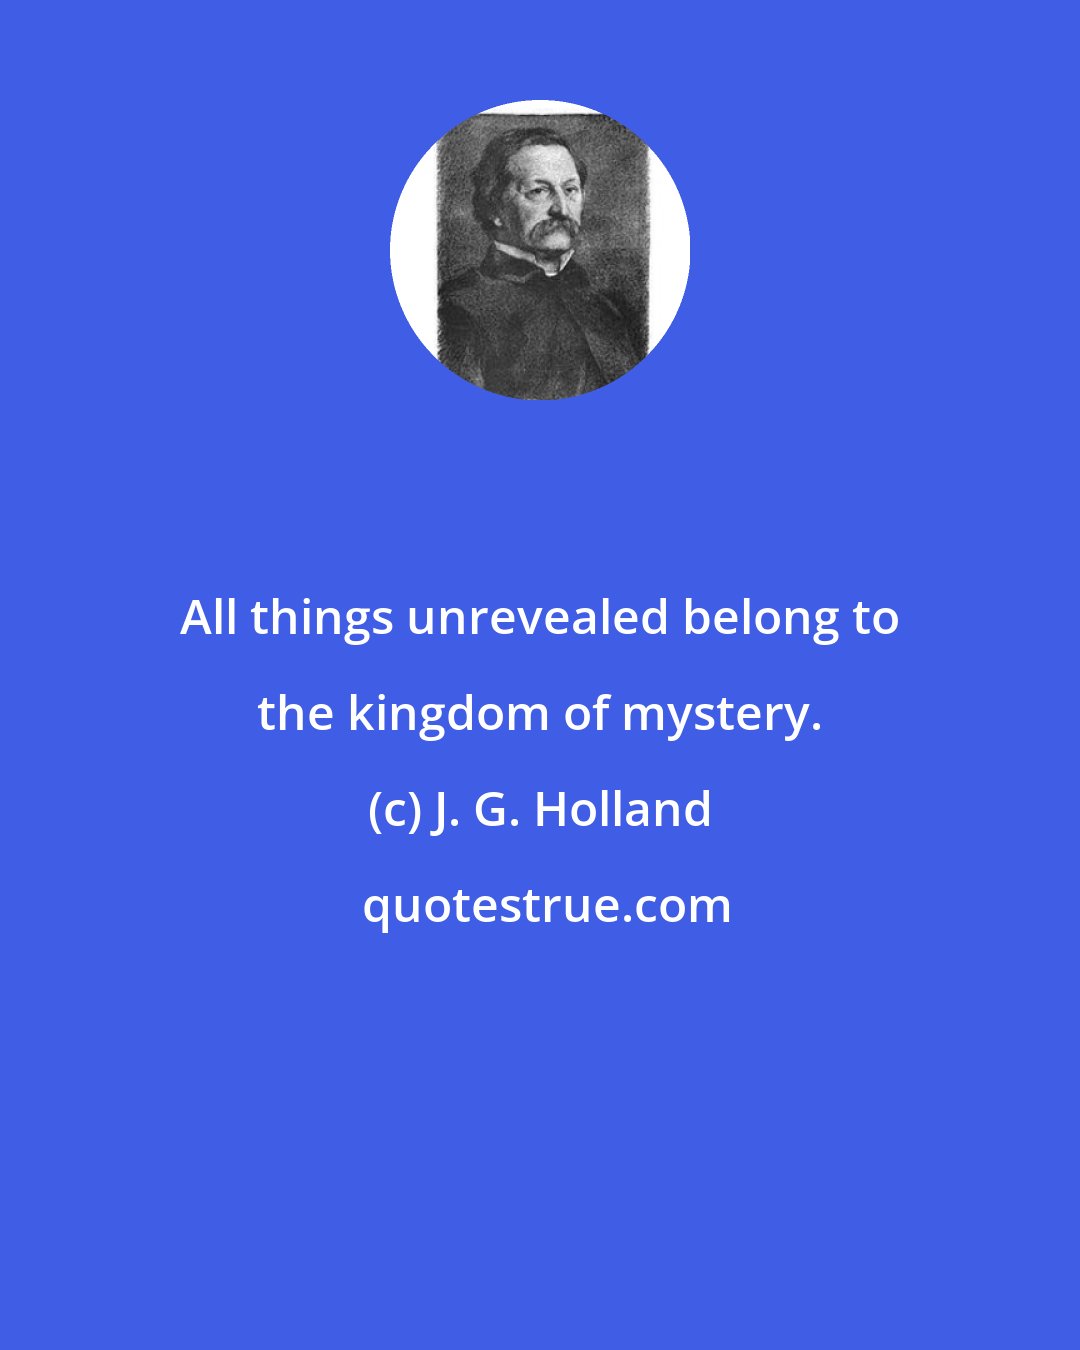 J. G. Holland: All things unrevealed belong to the kingdom of mystery.